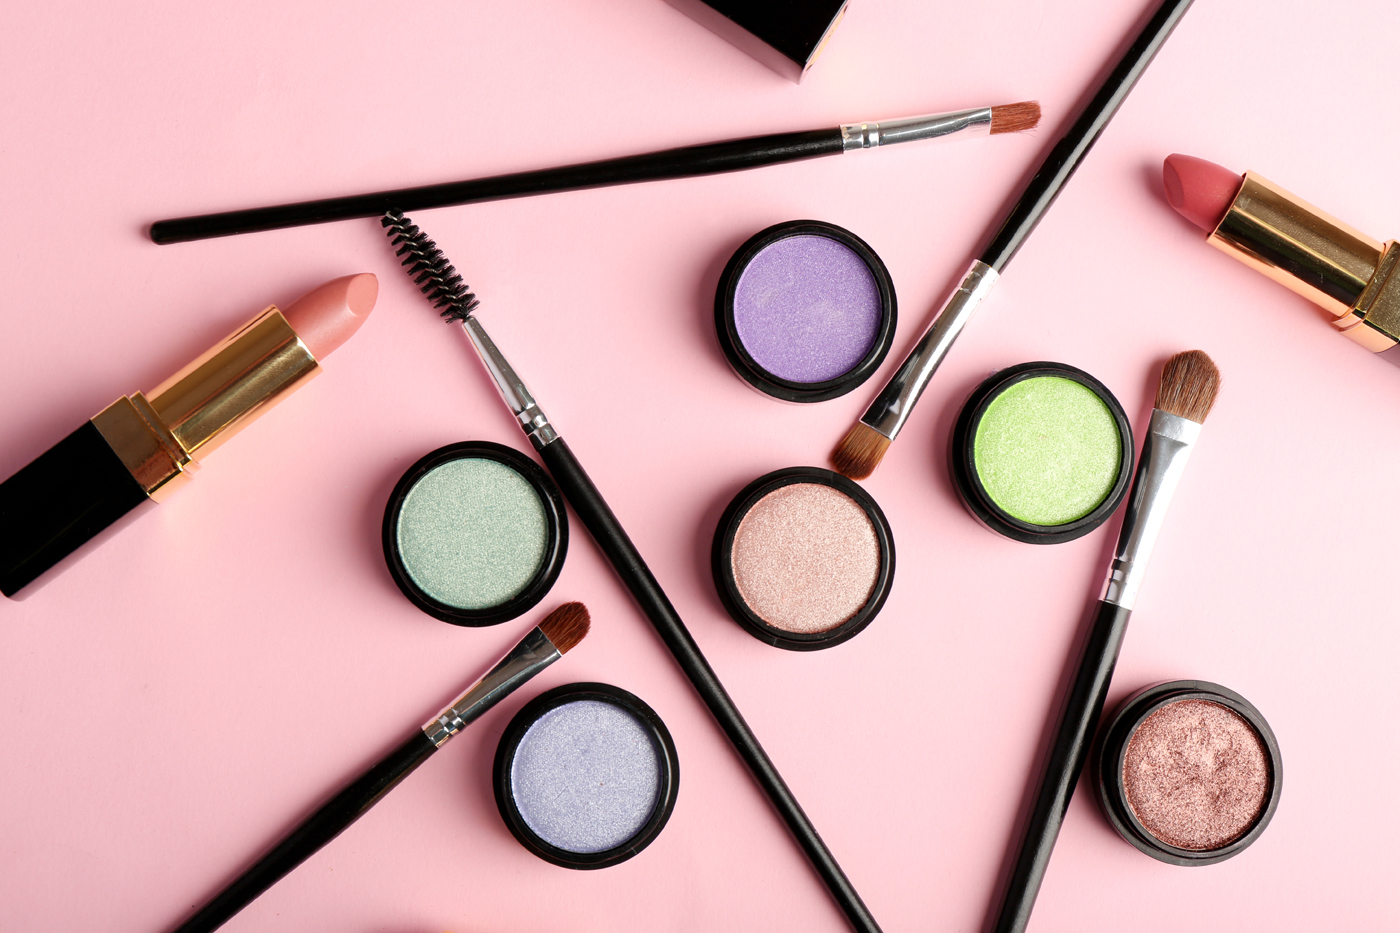 Branding and Marketing for the Cosmetics Industry: What Brands Need to Adopt to be Successful?